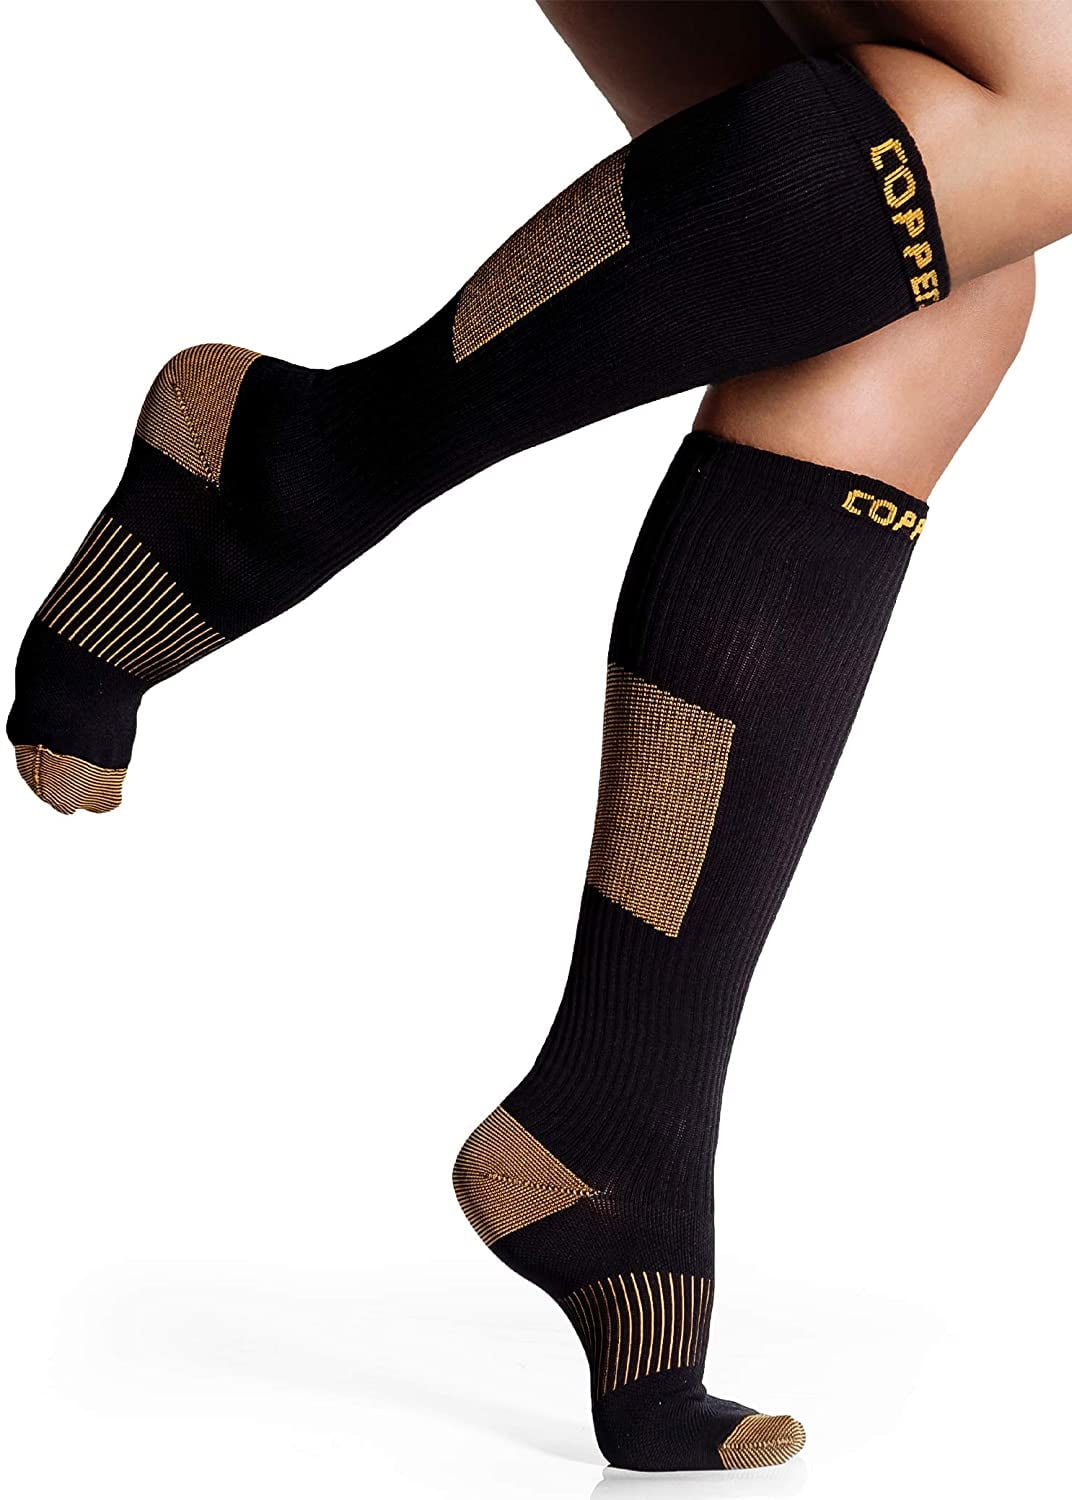 CopperJoint Long Compression Socks for Women and Men - 15-20 mm Hg